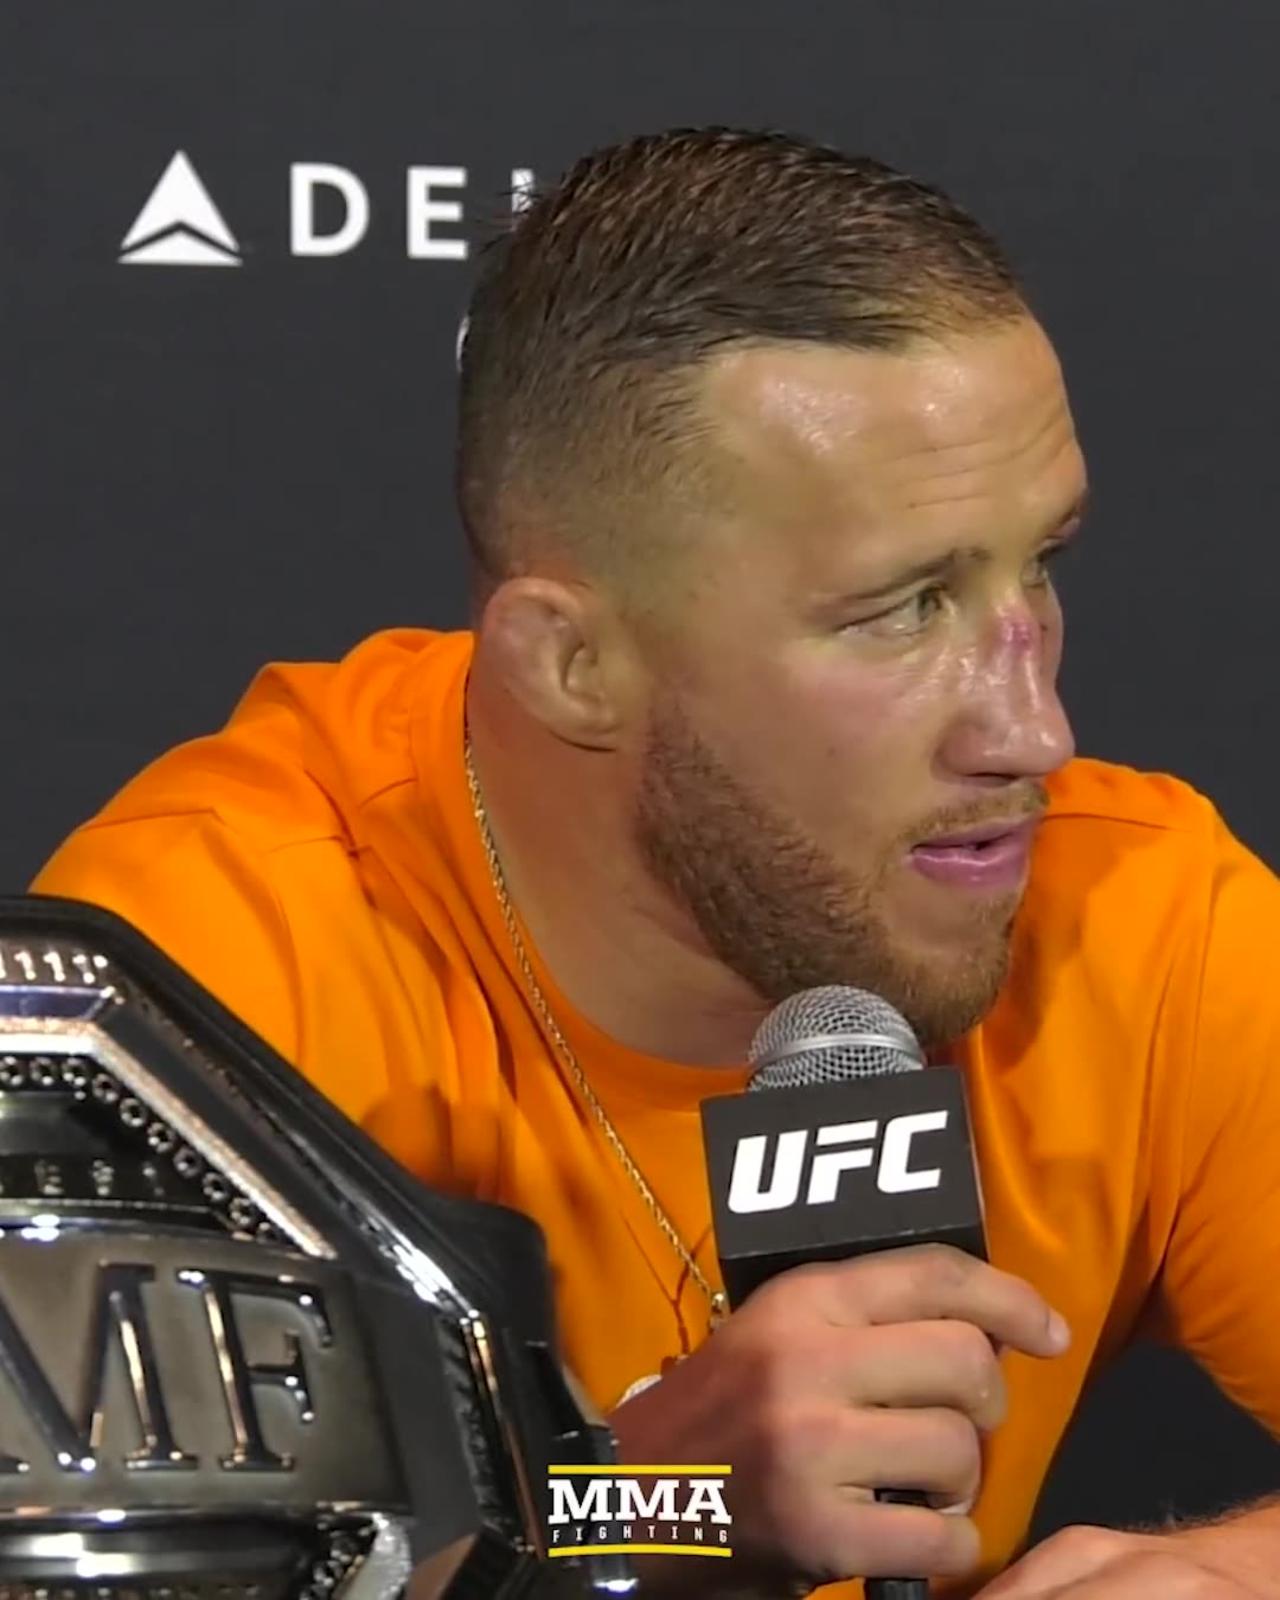 Justin Gaethje responds to Conor McGregor callout: “I’m not gonna fight someone on steroids”